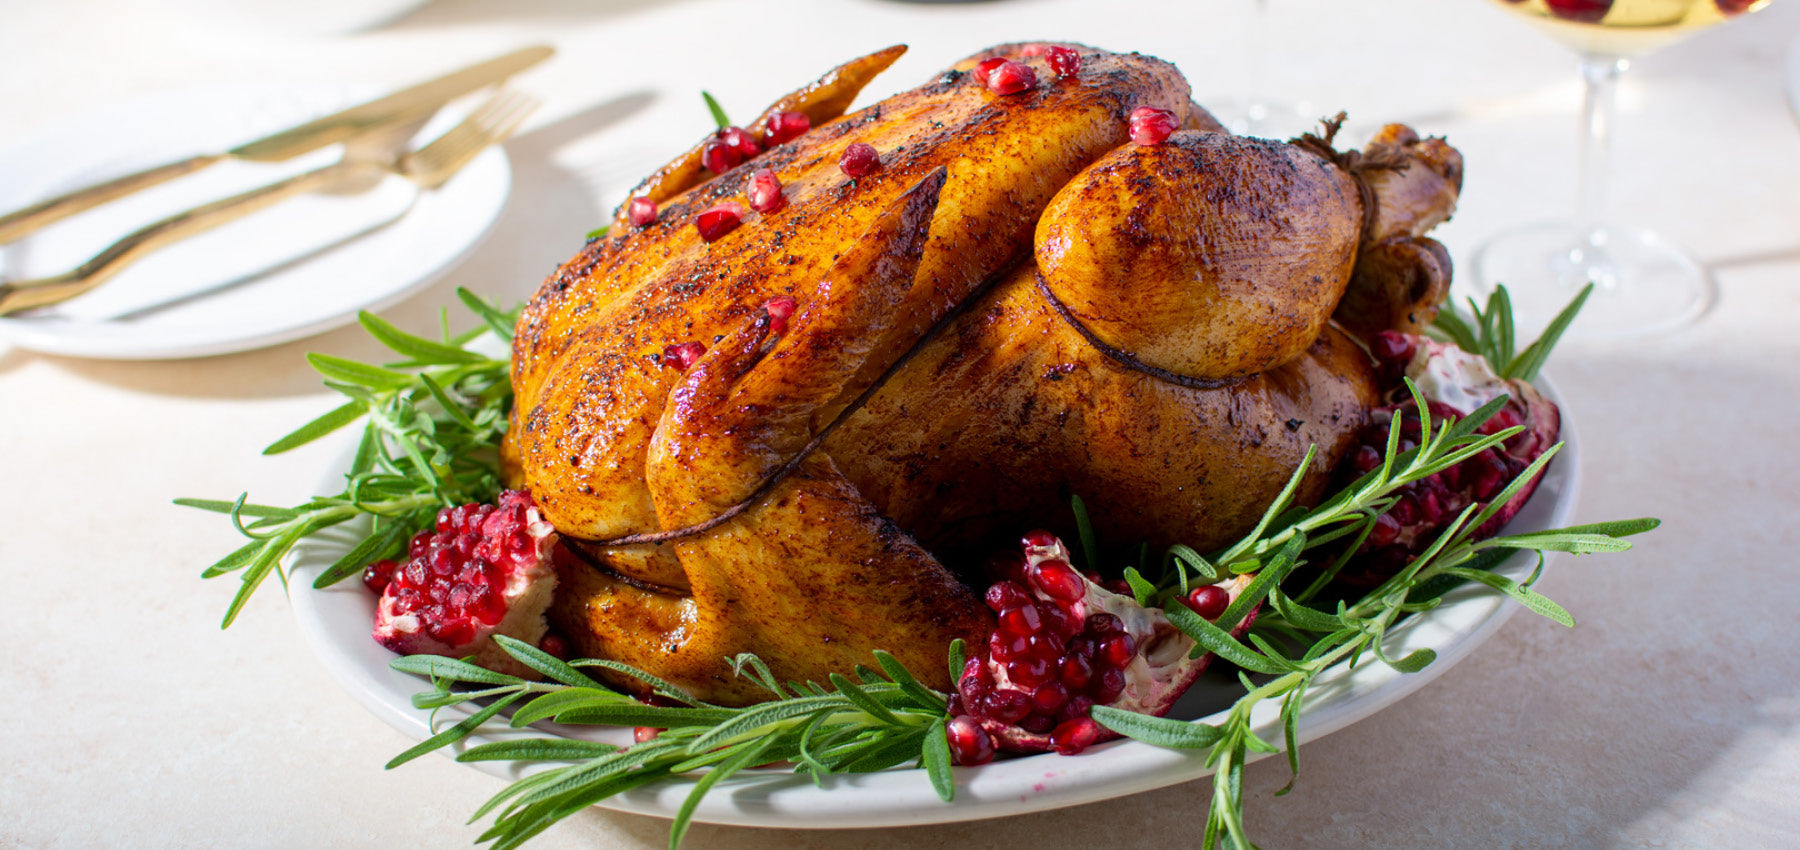 How to Make the Perfect Roast Turkey